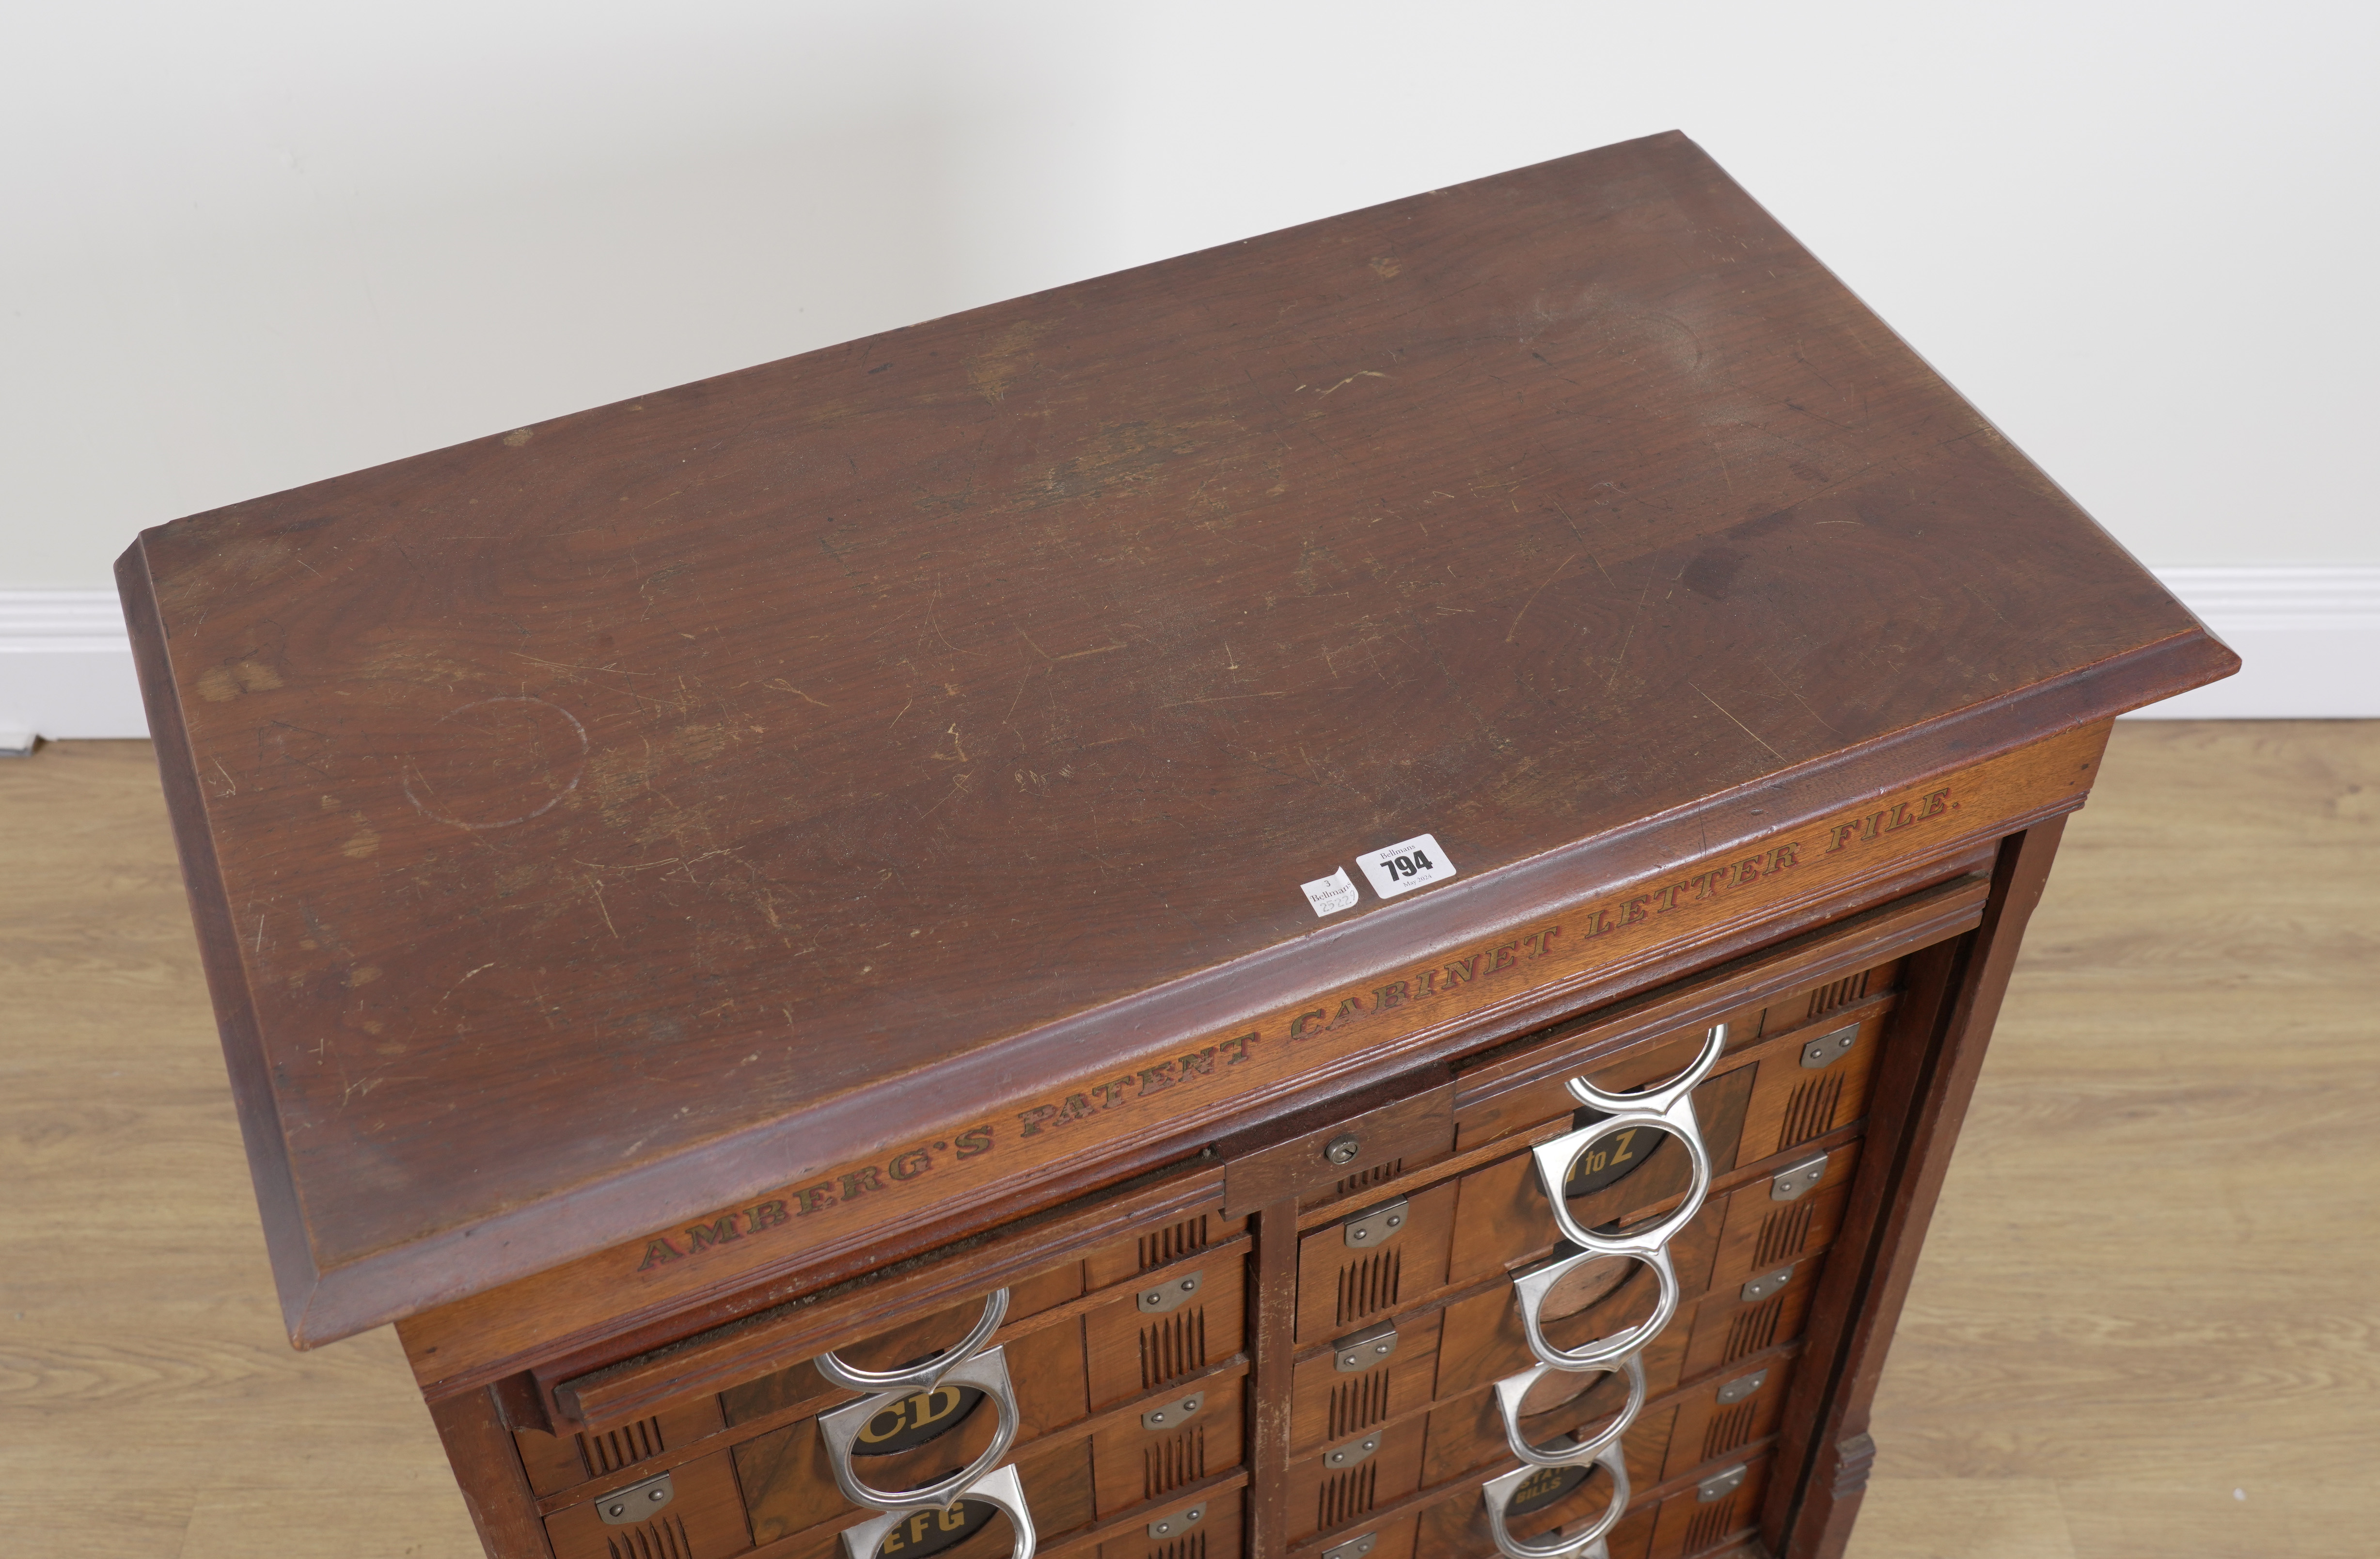 AMBERG’S PATENT CABINET LETTER FILE; AN AMERICAN TAMBOUR FRONTED OAK FILING CHEST - Image 4 of 4